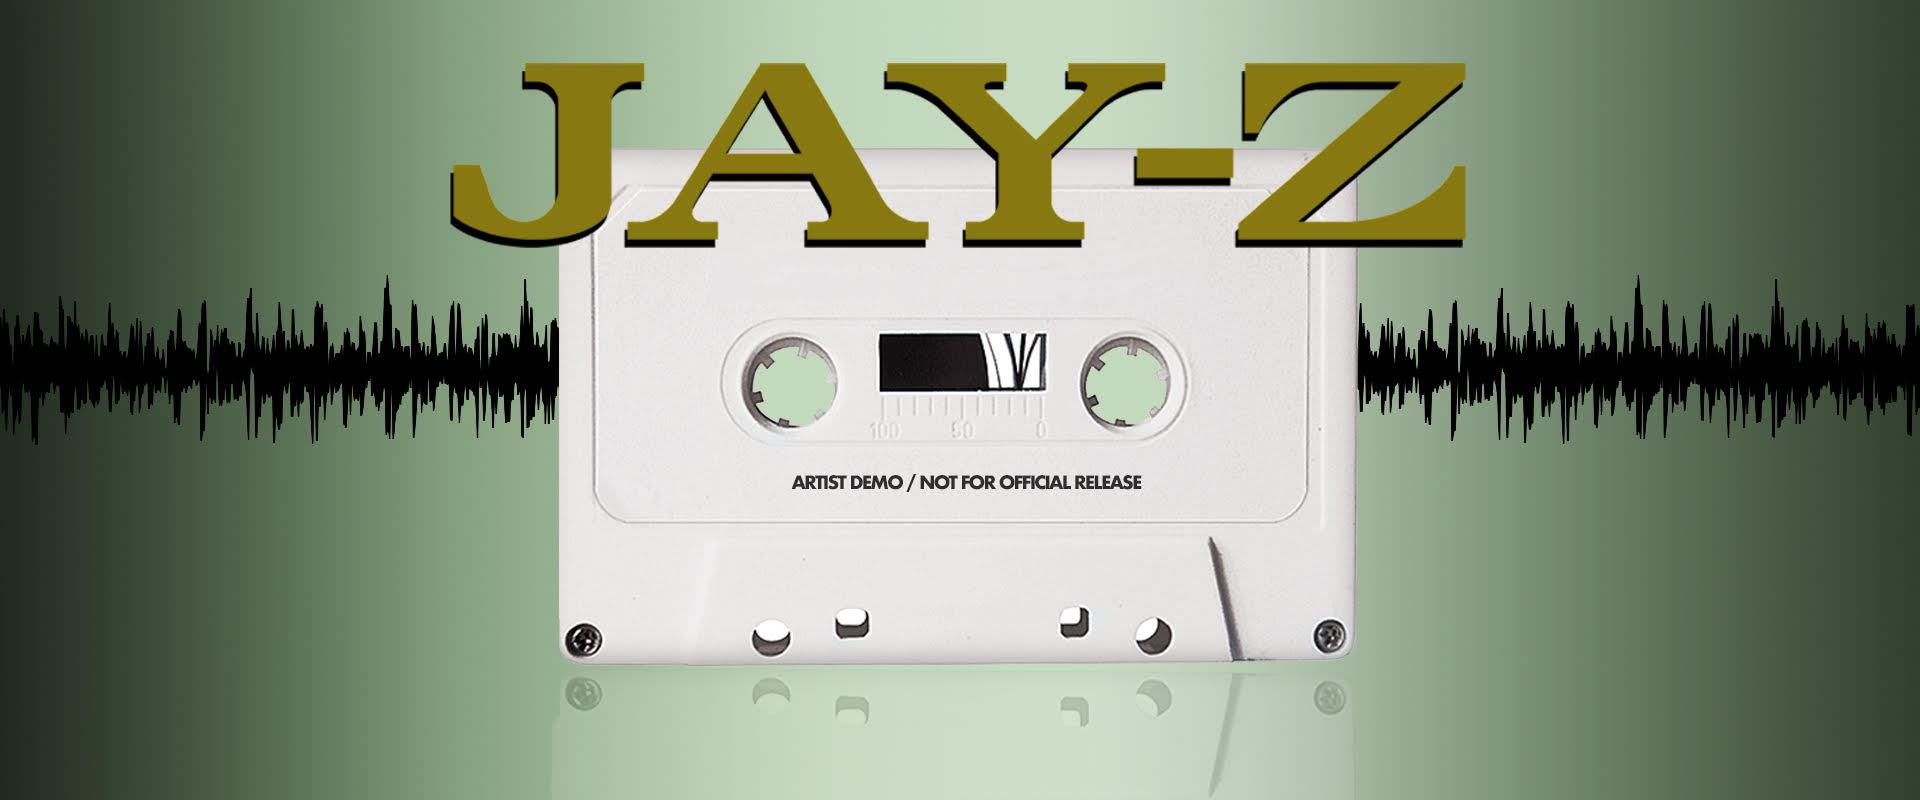 What's the Demo: Revisiting JAY-Z's Original Demo